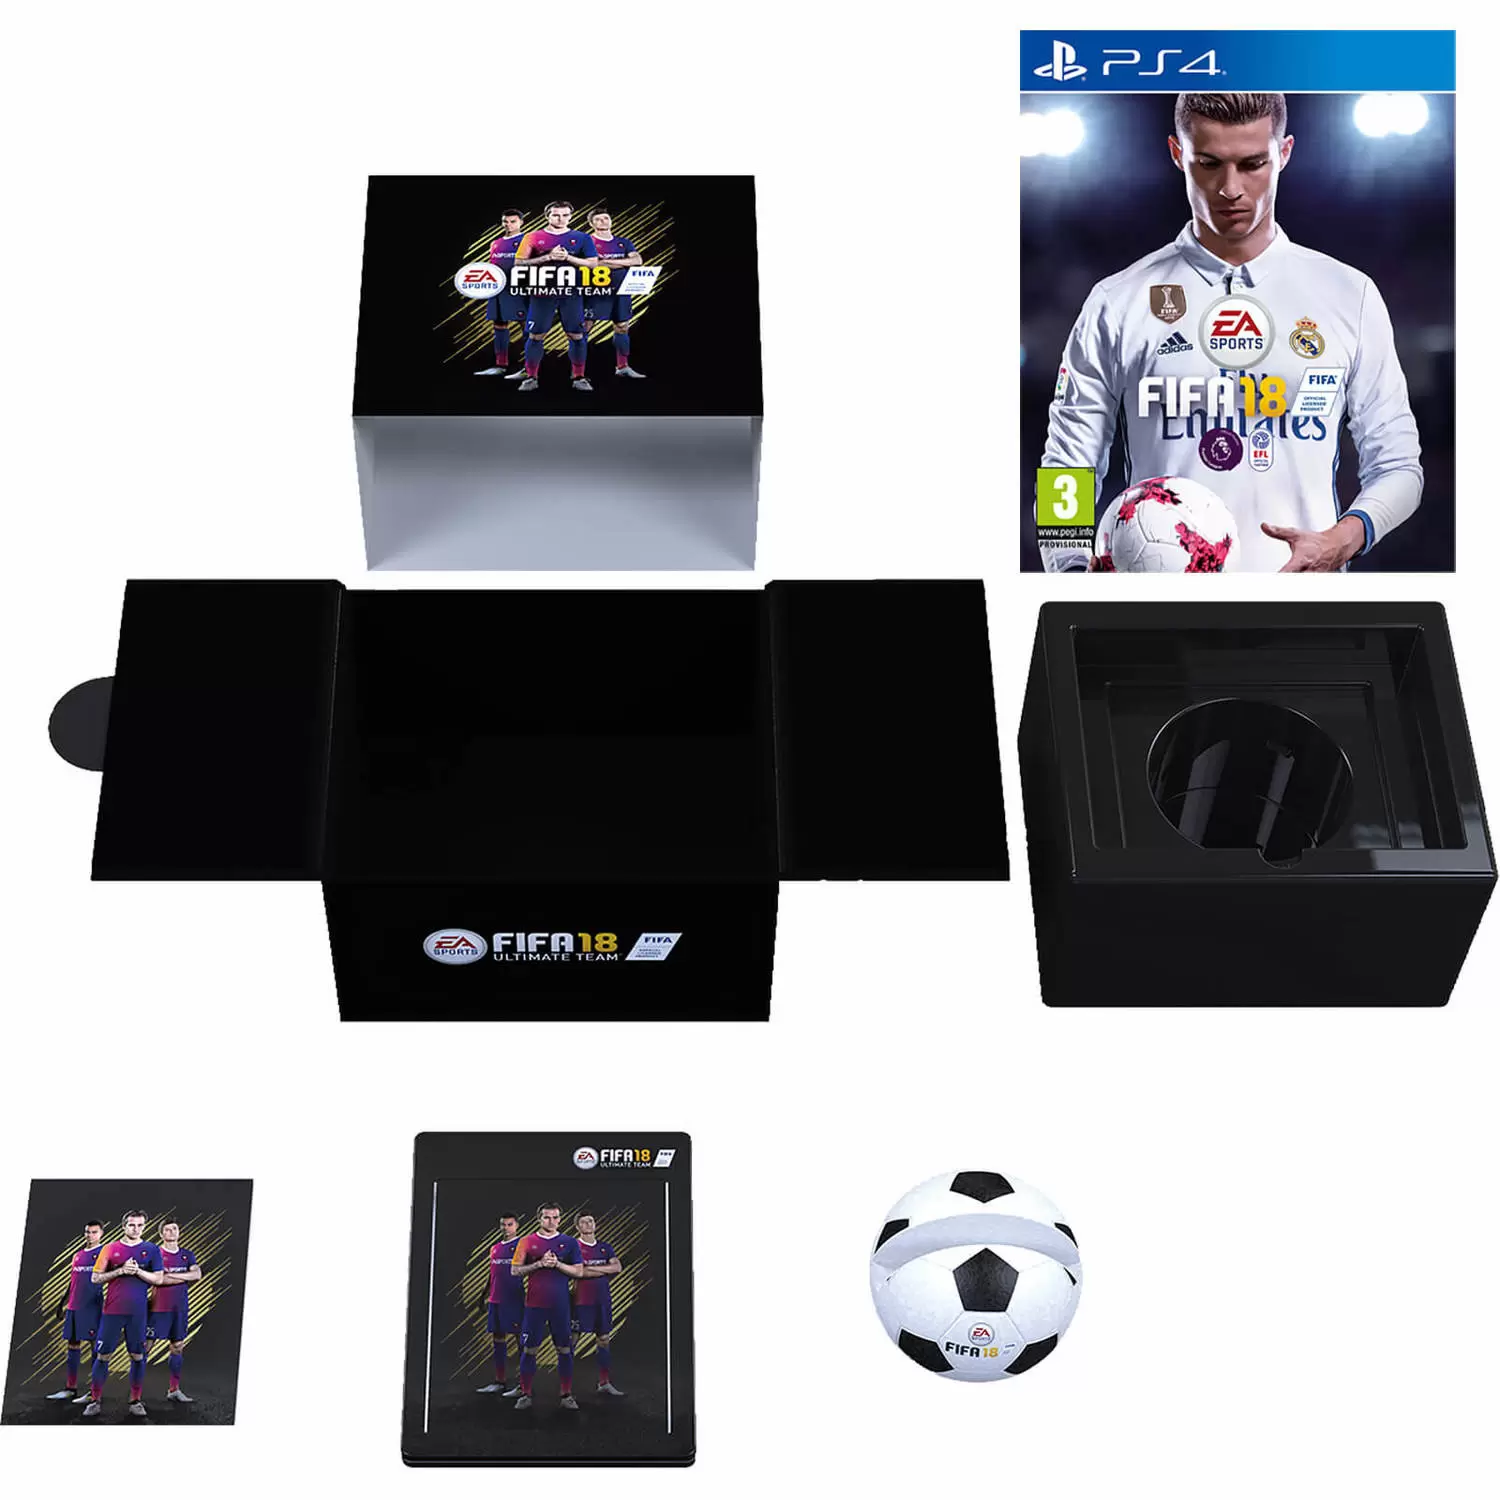 PS4 Games - FIFA 18 Ultimate Team Collector